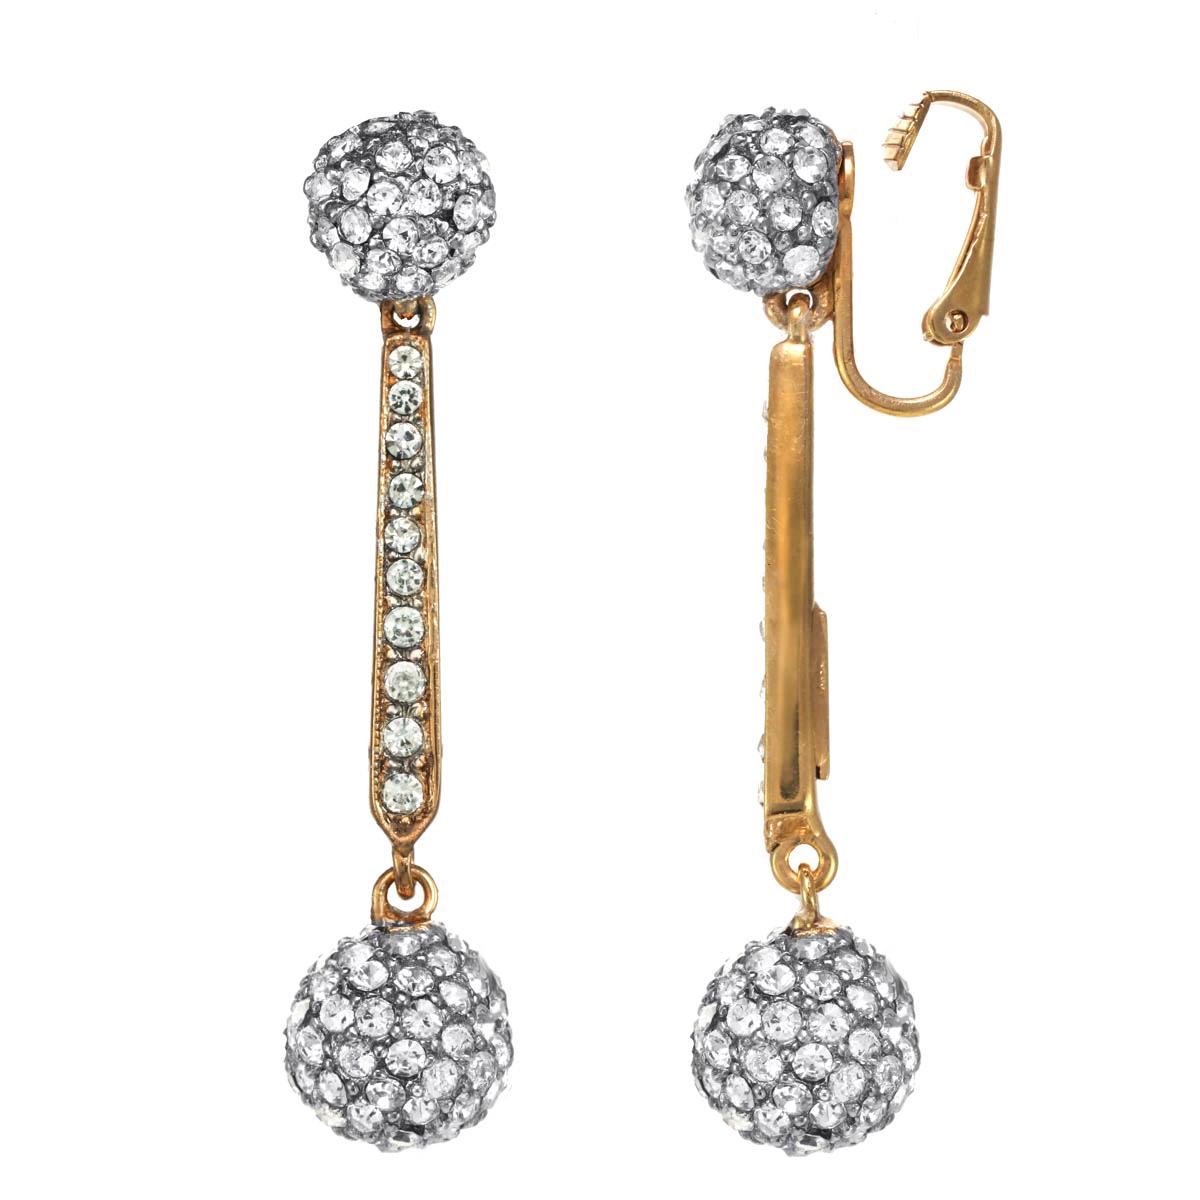 A classic design, these Crystal Ball Drop Earrings are adorned with illuminating Swarovski crystal rhinestones. Available in clip or post, these earrings are the perfect accessory to bring you from day to night. 

**Please advise  what backing you